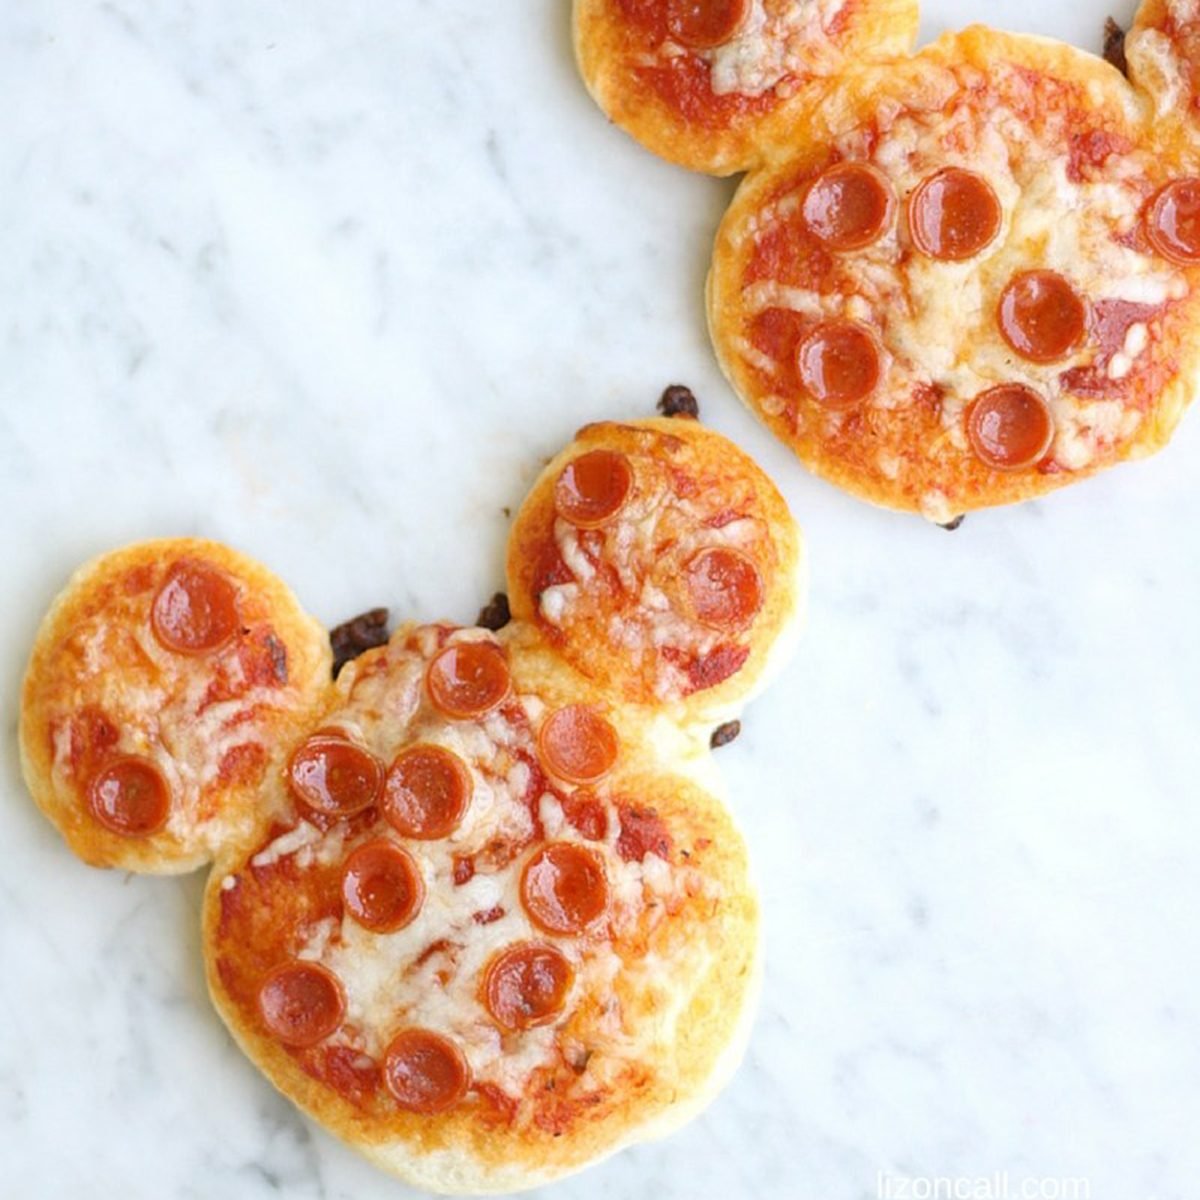 minnie mouse party food ideas